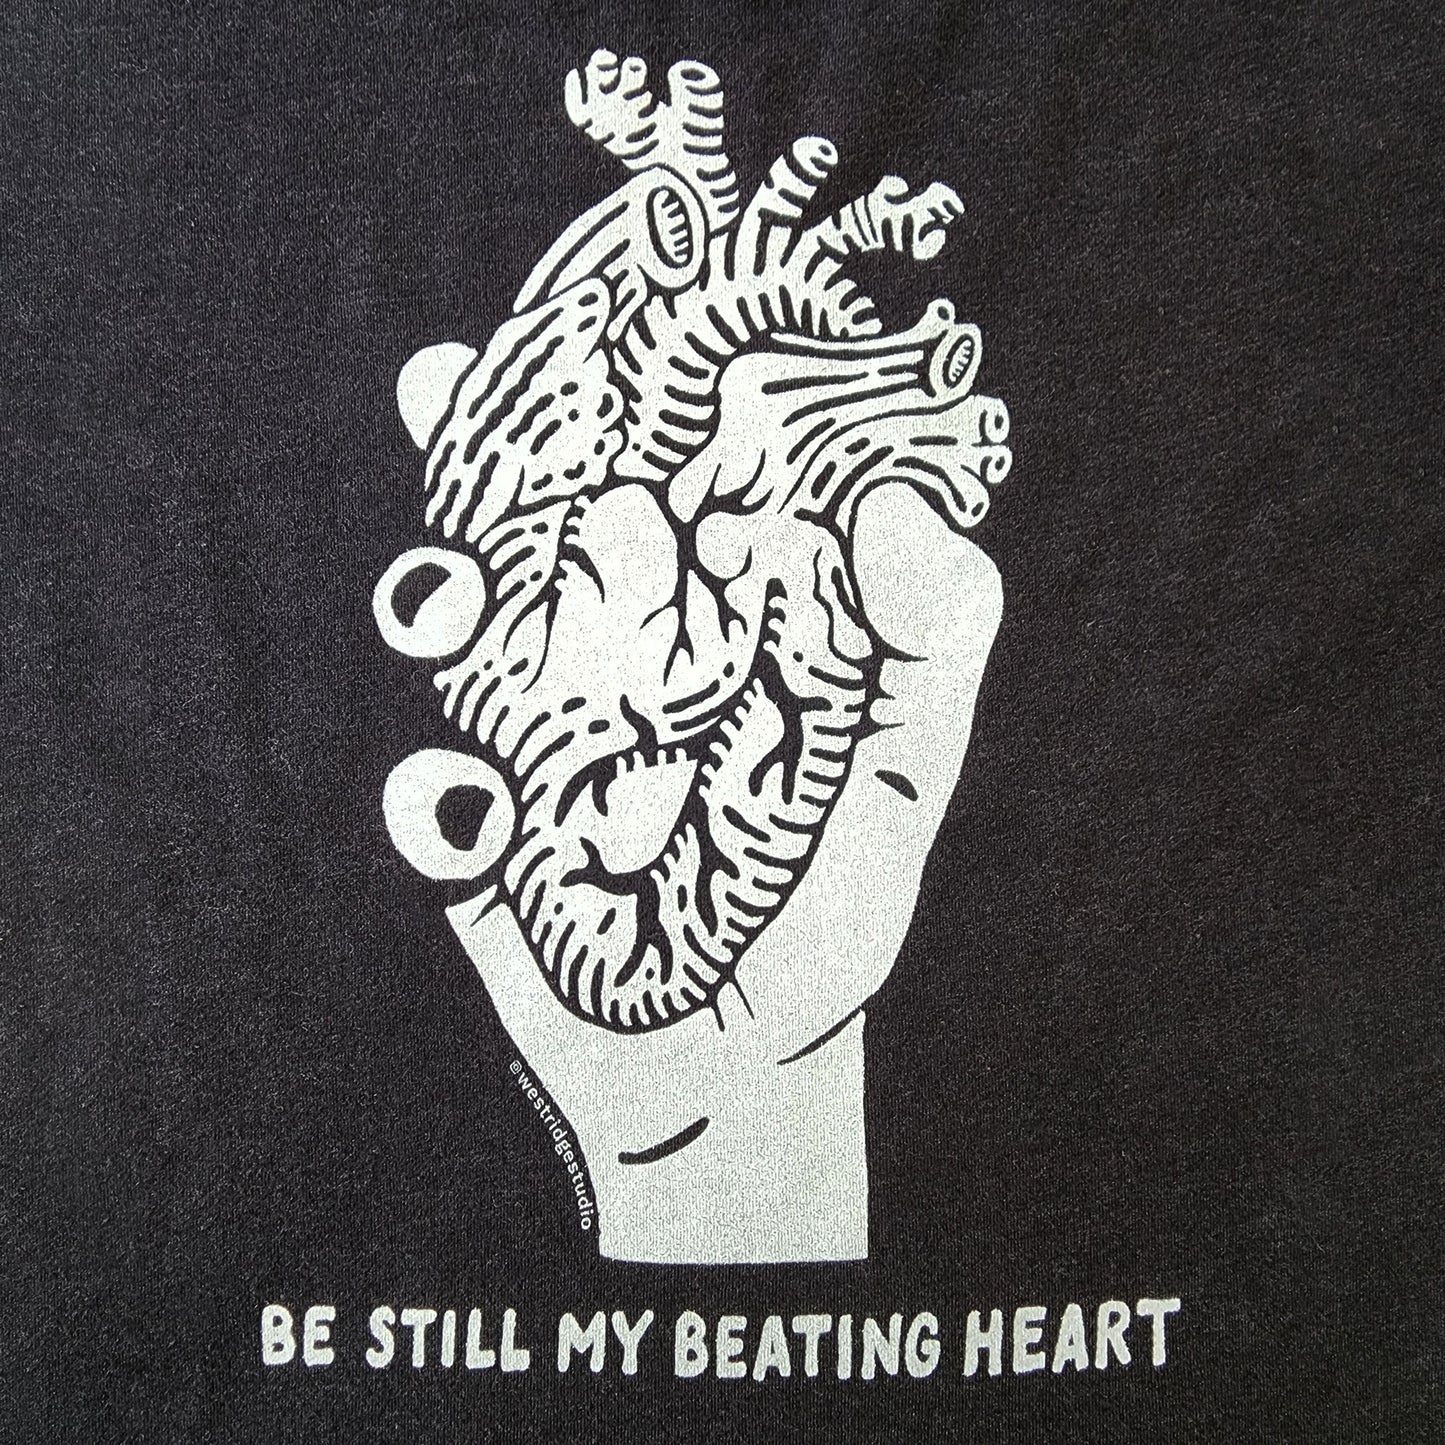 Be Still My Beating Heart graphic black tank top for women - detail of heart graphic